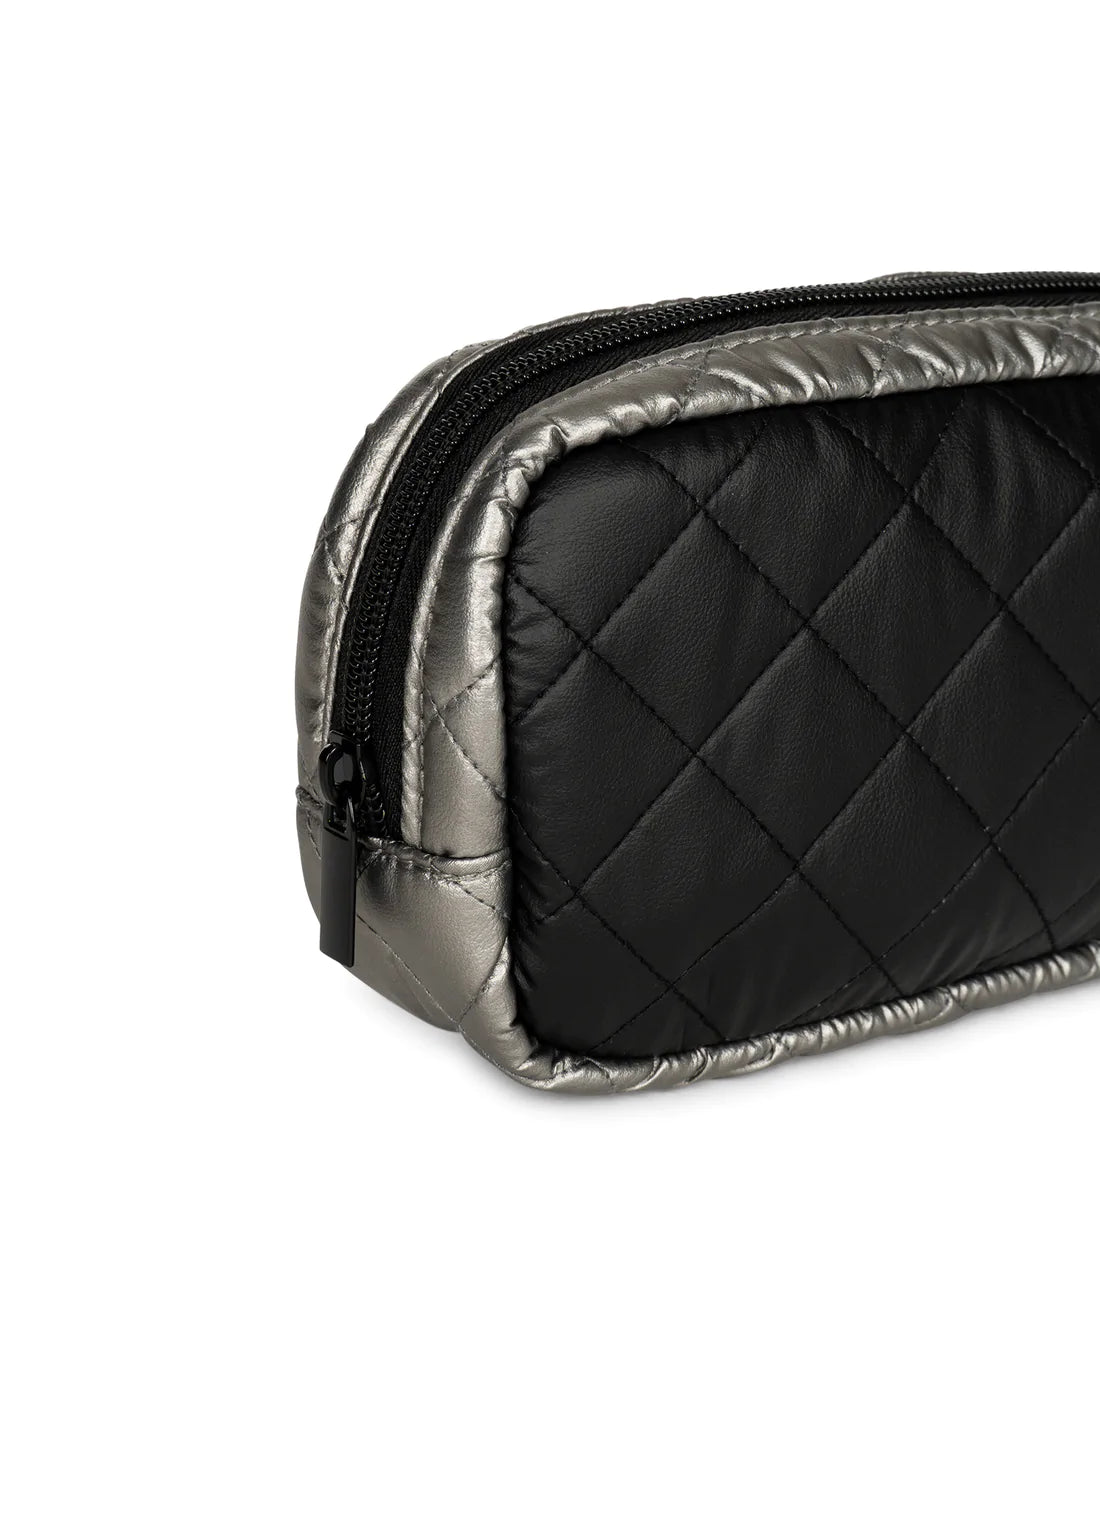 Charli cosmetic case - carbon